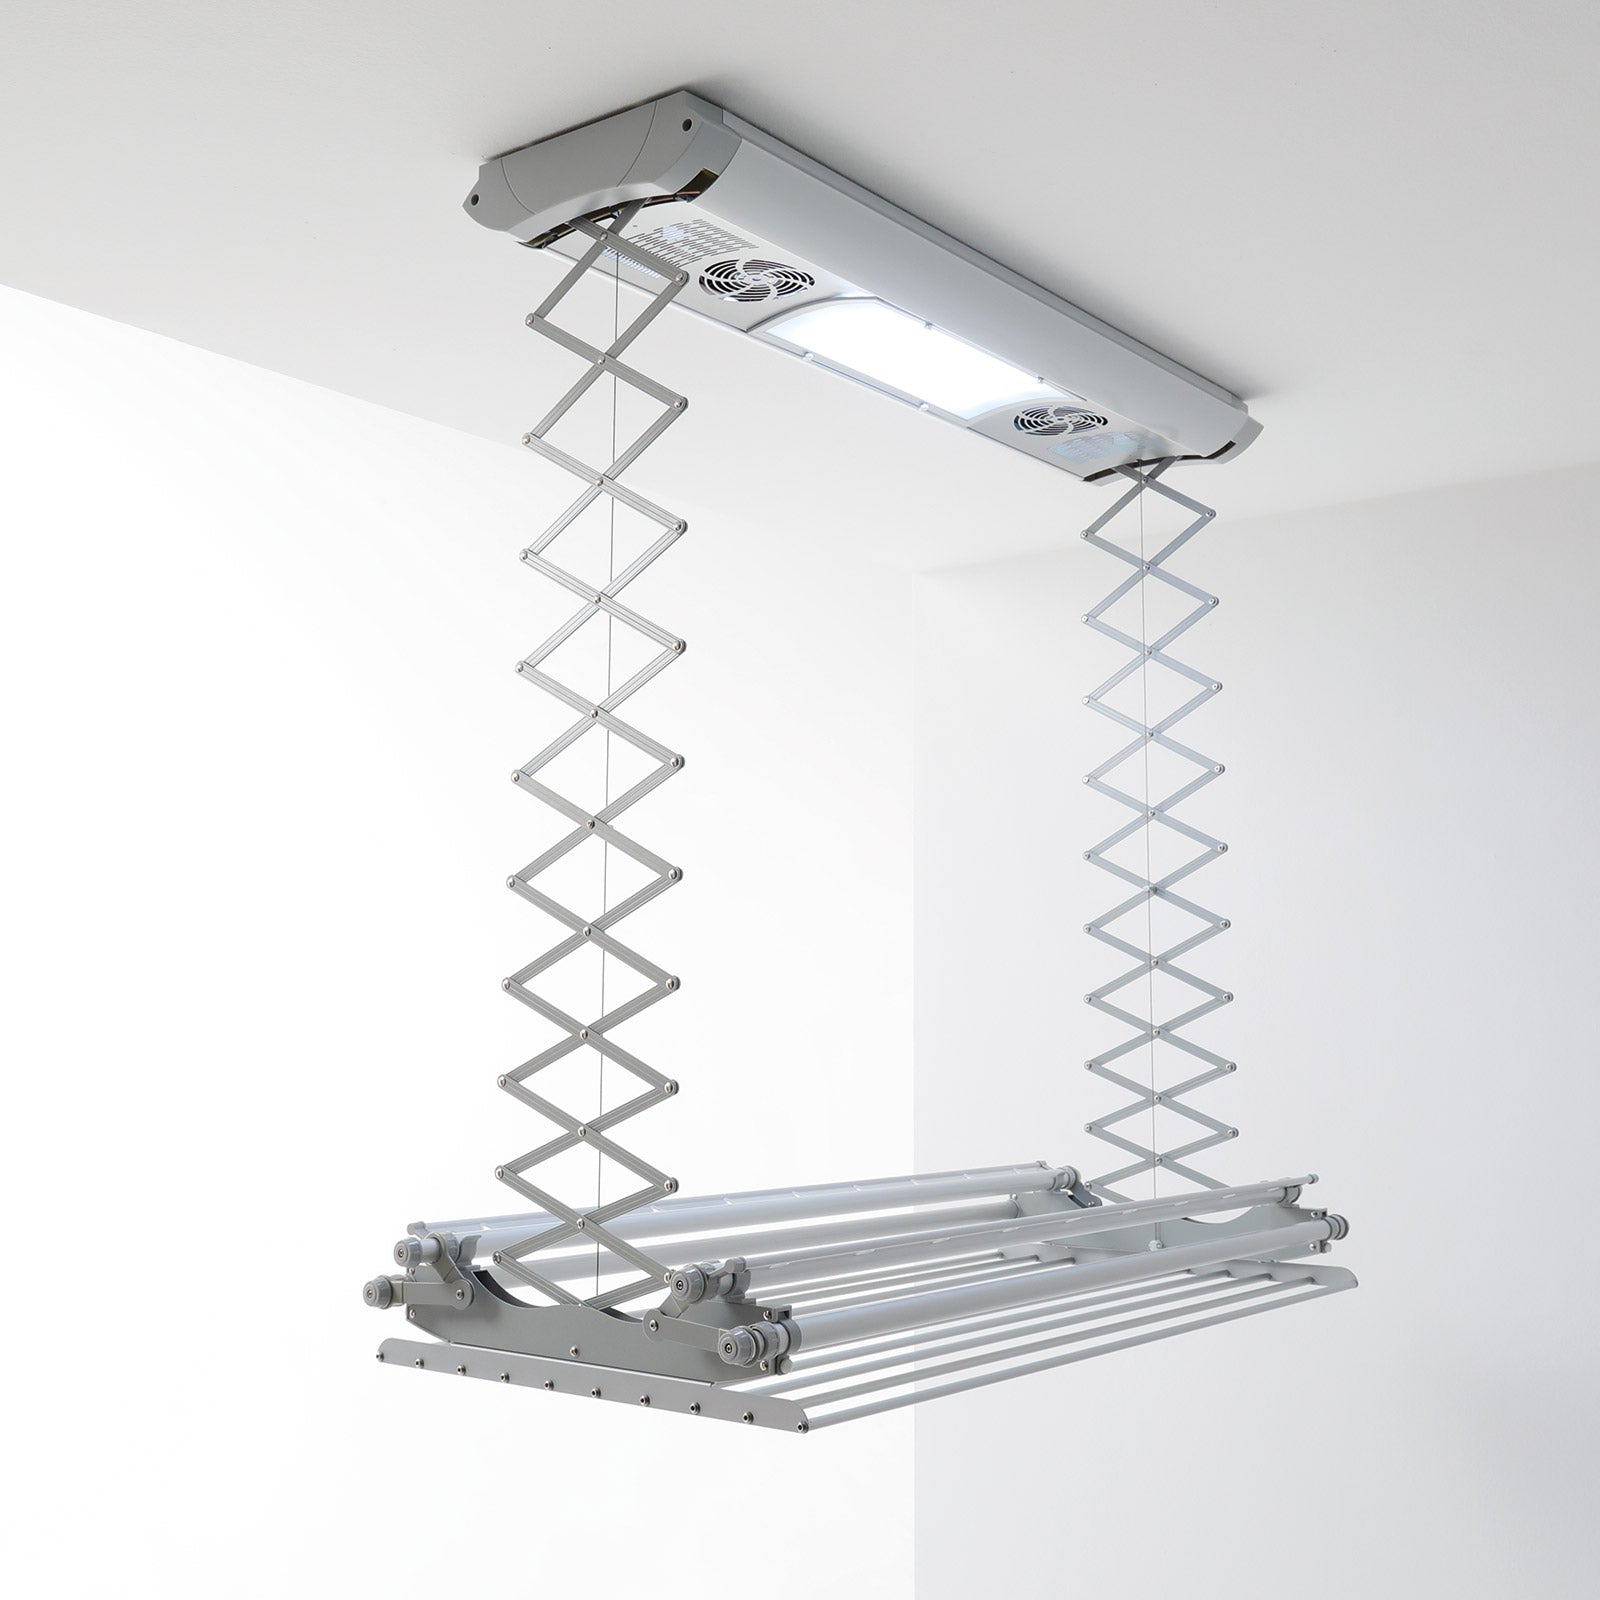 Ceiling Drying Rack Foxydry Air